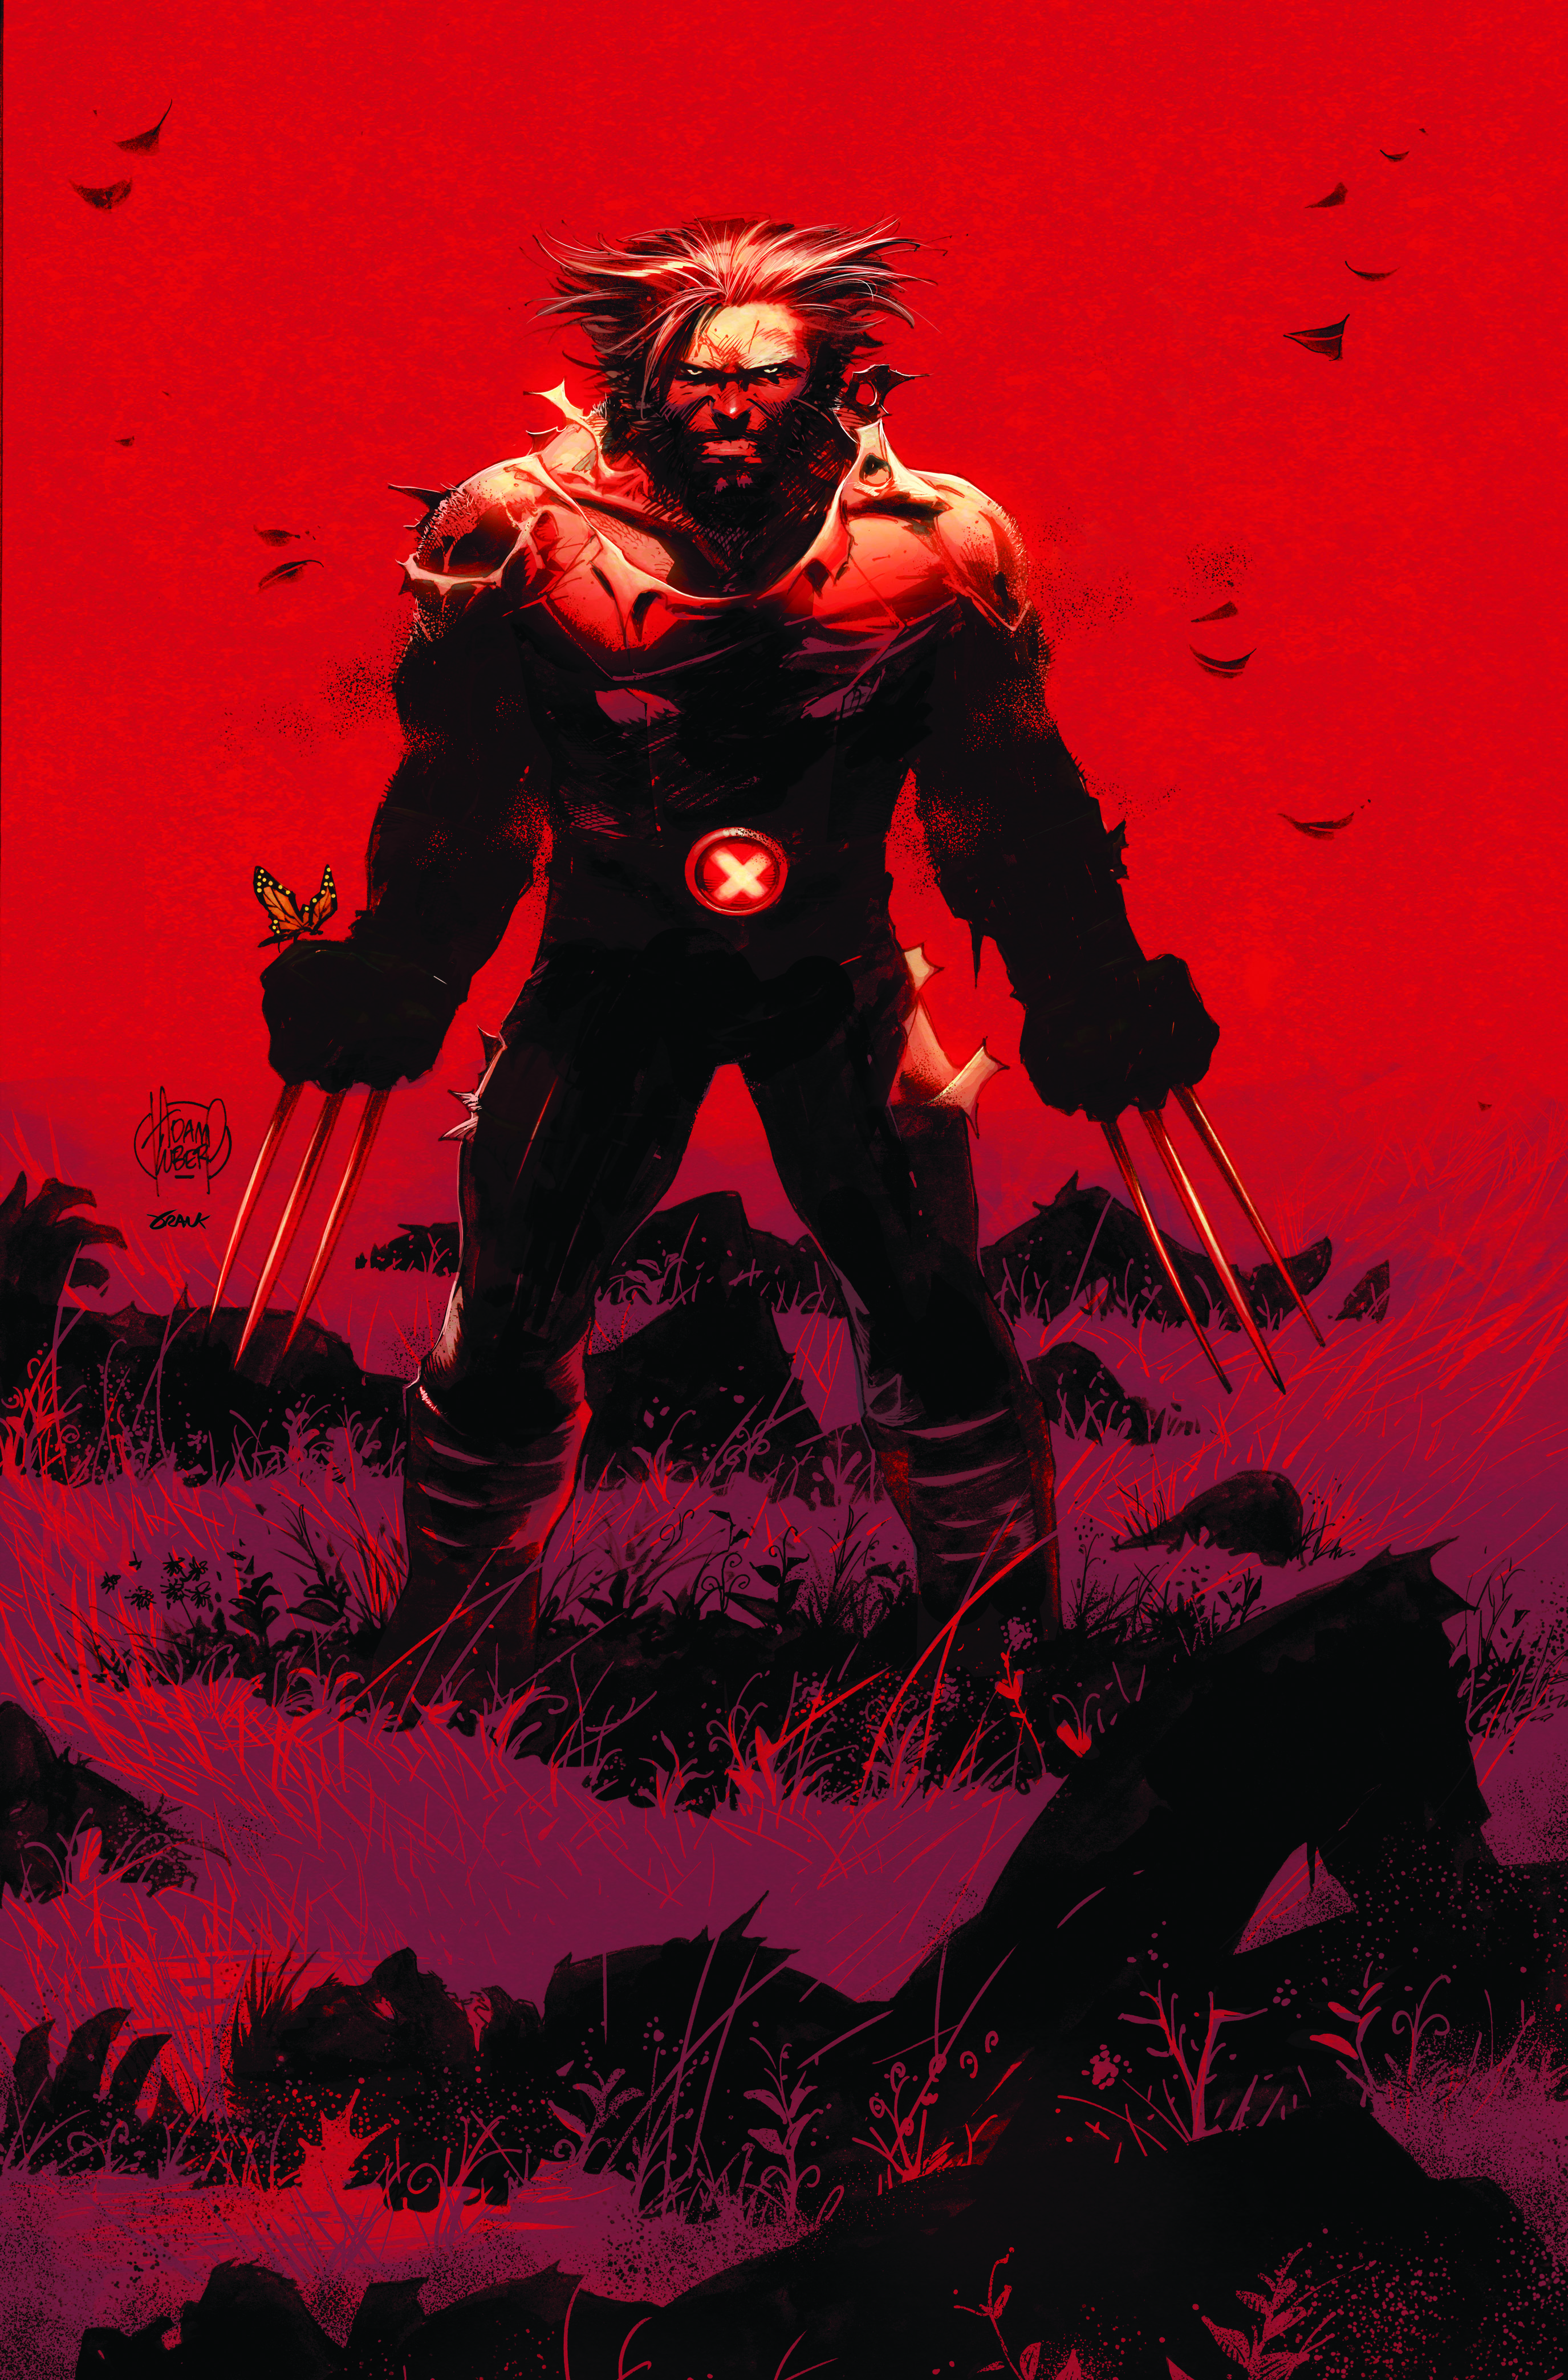 Wolverine stands on a battlefield, claws out and snarling. A butterfly is perched on his right fist, on the cover of Wolverine #1, Marvel Comics (2020).